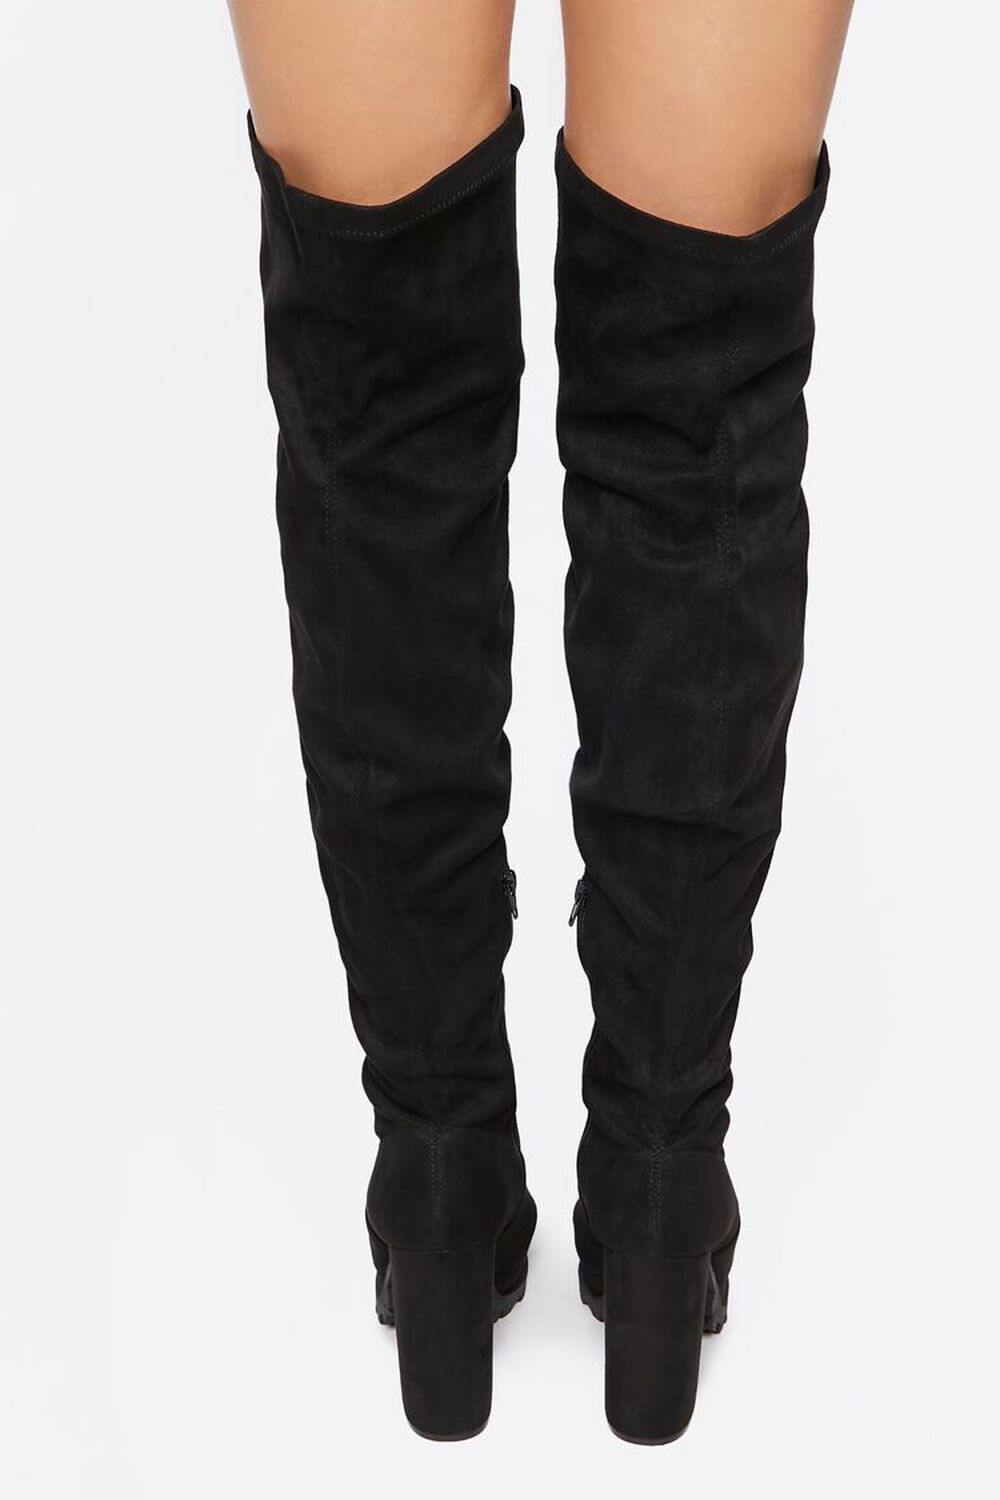 BLACK Faux Suede Over-The-Knee Boots, image 3